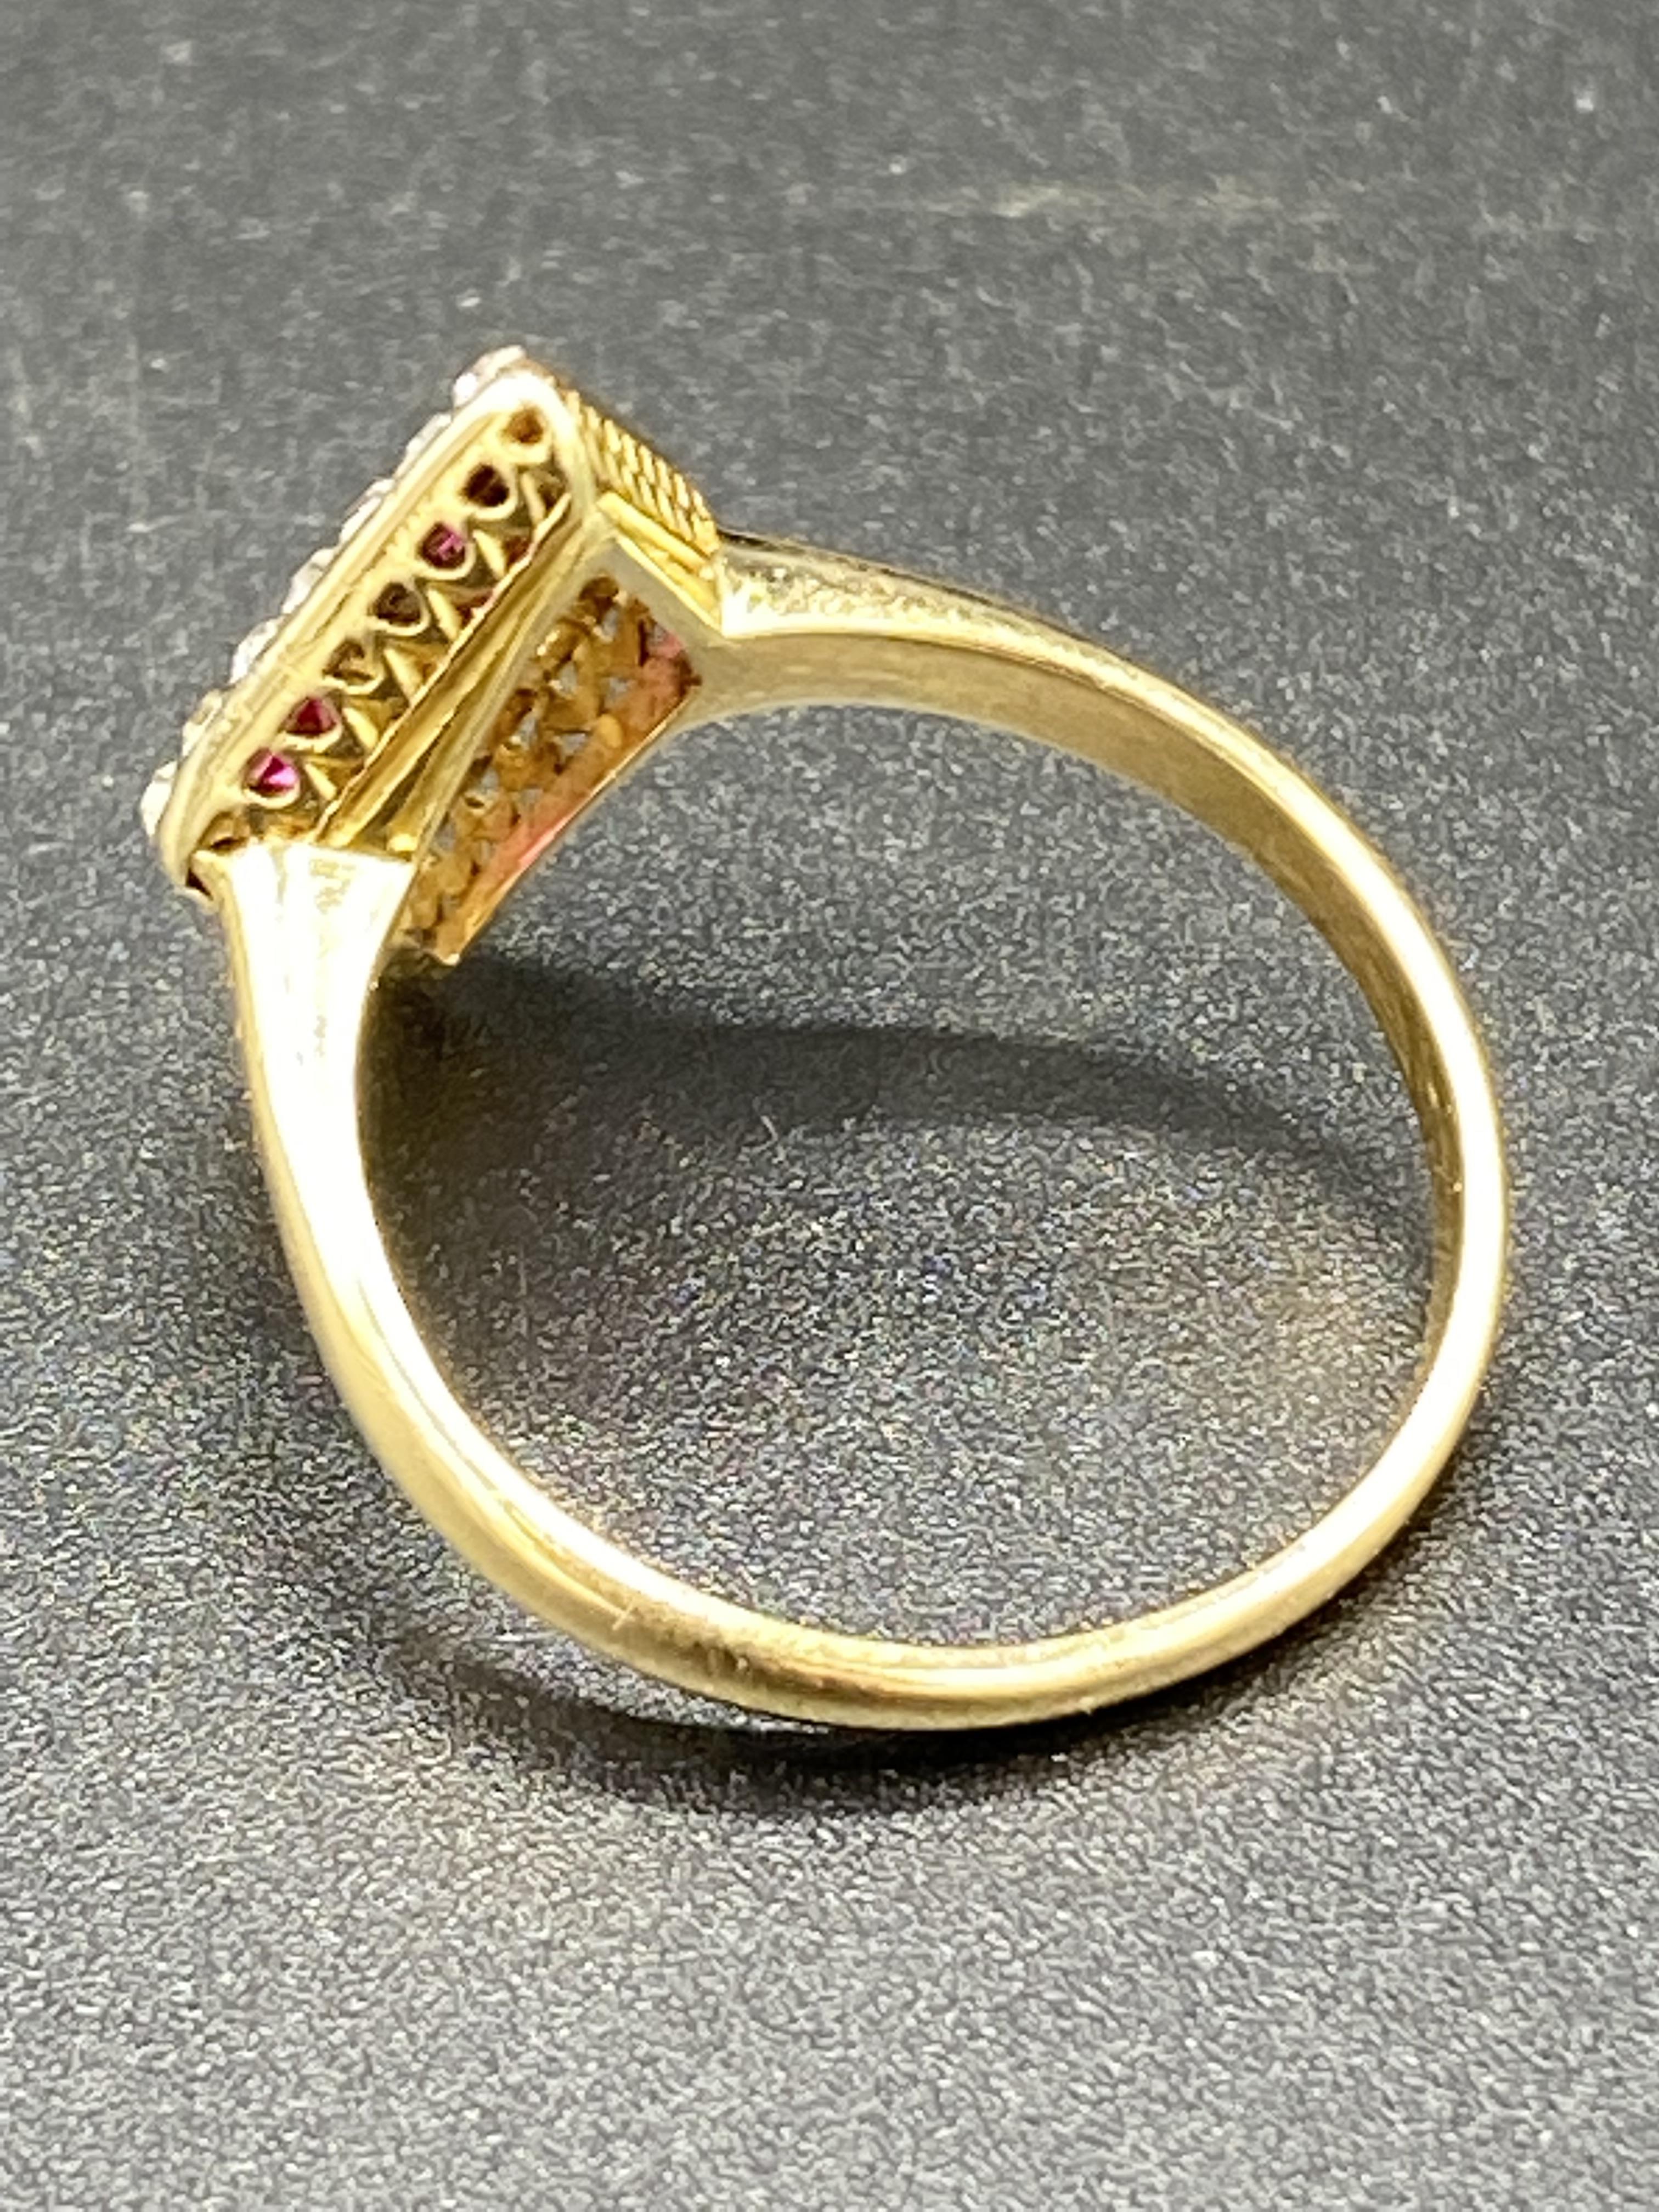 Gold, ruby and diamond ring - Image 4 of 6